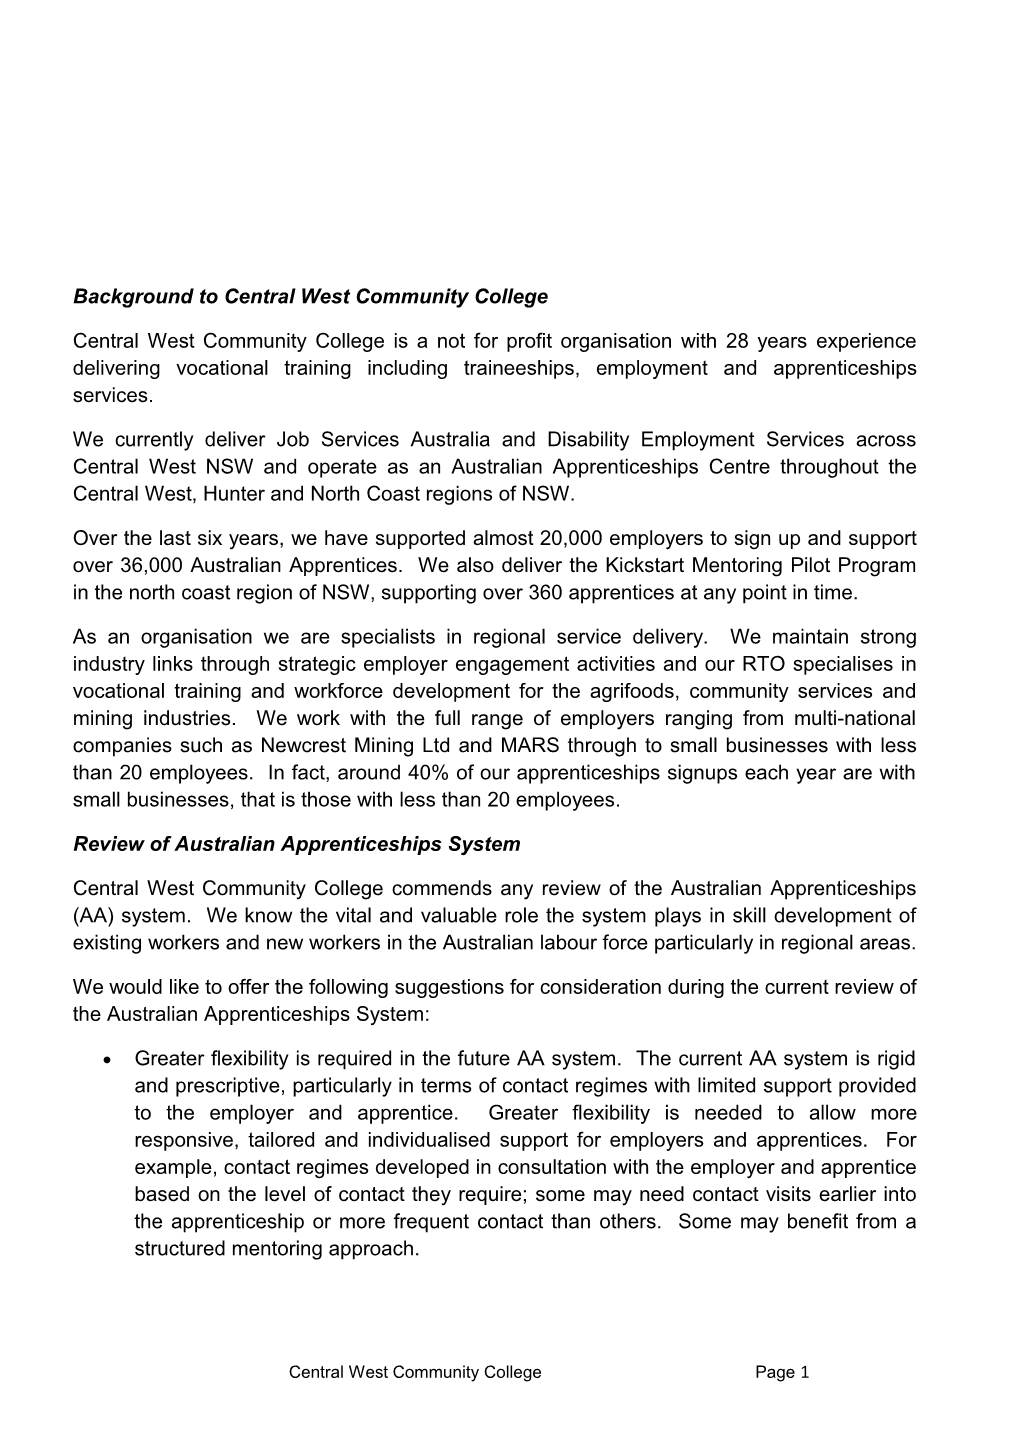 Background to Central West Community College